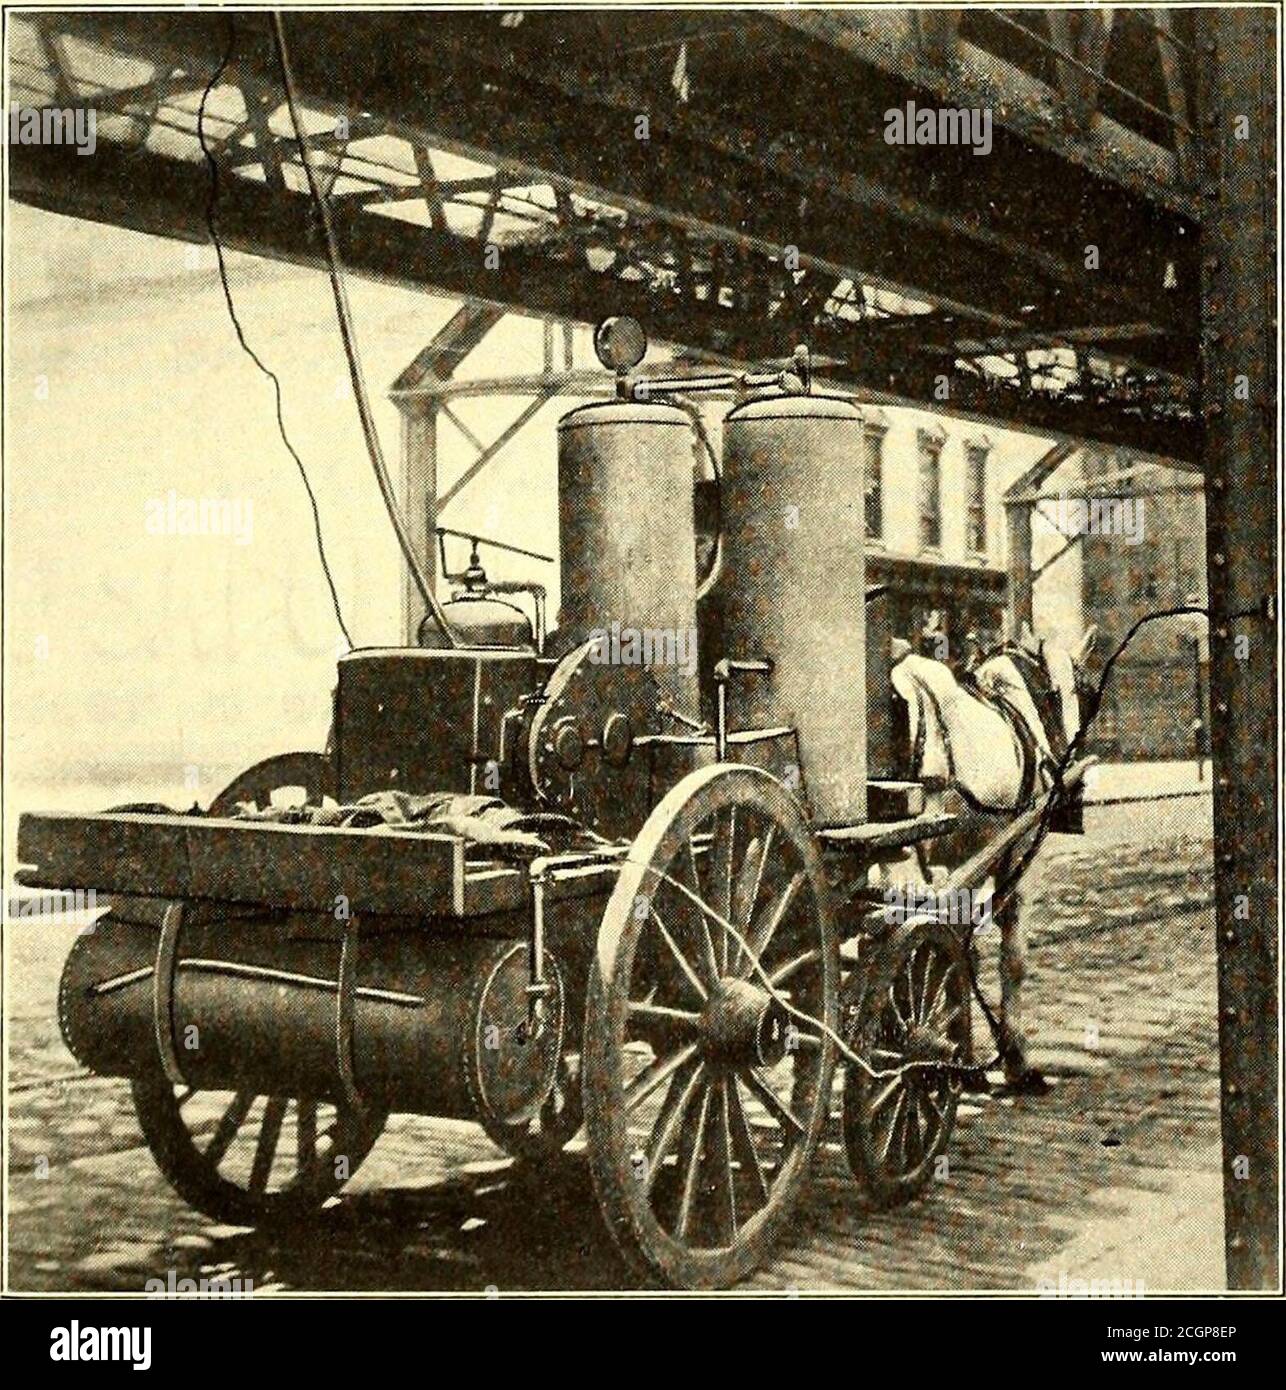 . The Street railway journal . complete the joint. This method of manu-facture insures that every layer of the bond is of equal excel-lence. Some tests on this make of bond were made at the Niagara ReservoirPressureat Start,Lbs. Time BeforeCompressorStarts, Sec. NozzleOperates,Sec. ReservoirPressurewhen NozzleStarts. Lbs. 1 otal I i me PumpOperates,Sec. Voltag IOO 5-8 17.8 82 66 513 I02 5-5 135- 60 224 488 96 54 74 1325 488 IOI 5-3 52.6 70 122.5 485 99 5-3 127.8 55 238-5 5IO 98 4.4 94-4 55 213 500 98 4.6 116.4 72.5 508 99 5-° 55 232 493 IOT 7-4 92 56 198.5 500 98 5.o 3° 76 86 508 96 3-2 33-8 7 Stock Photo